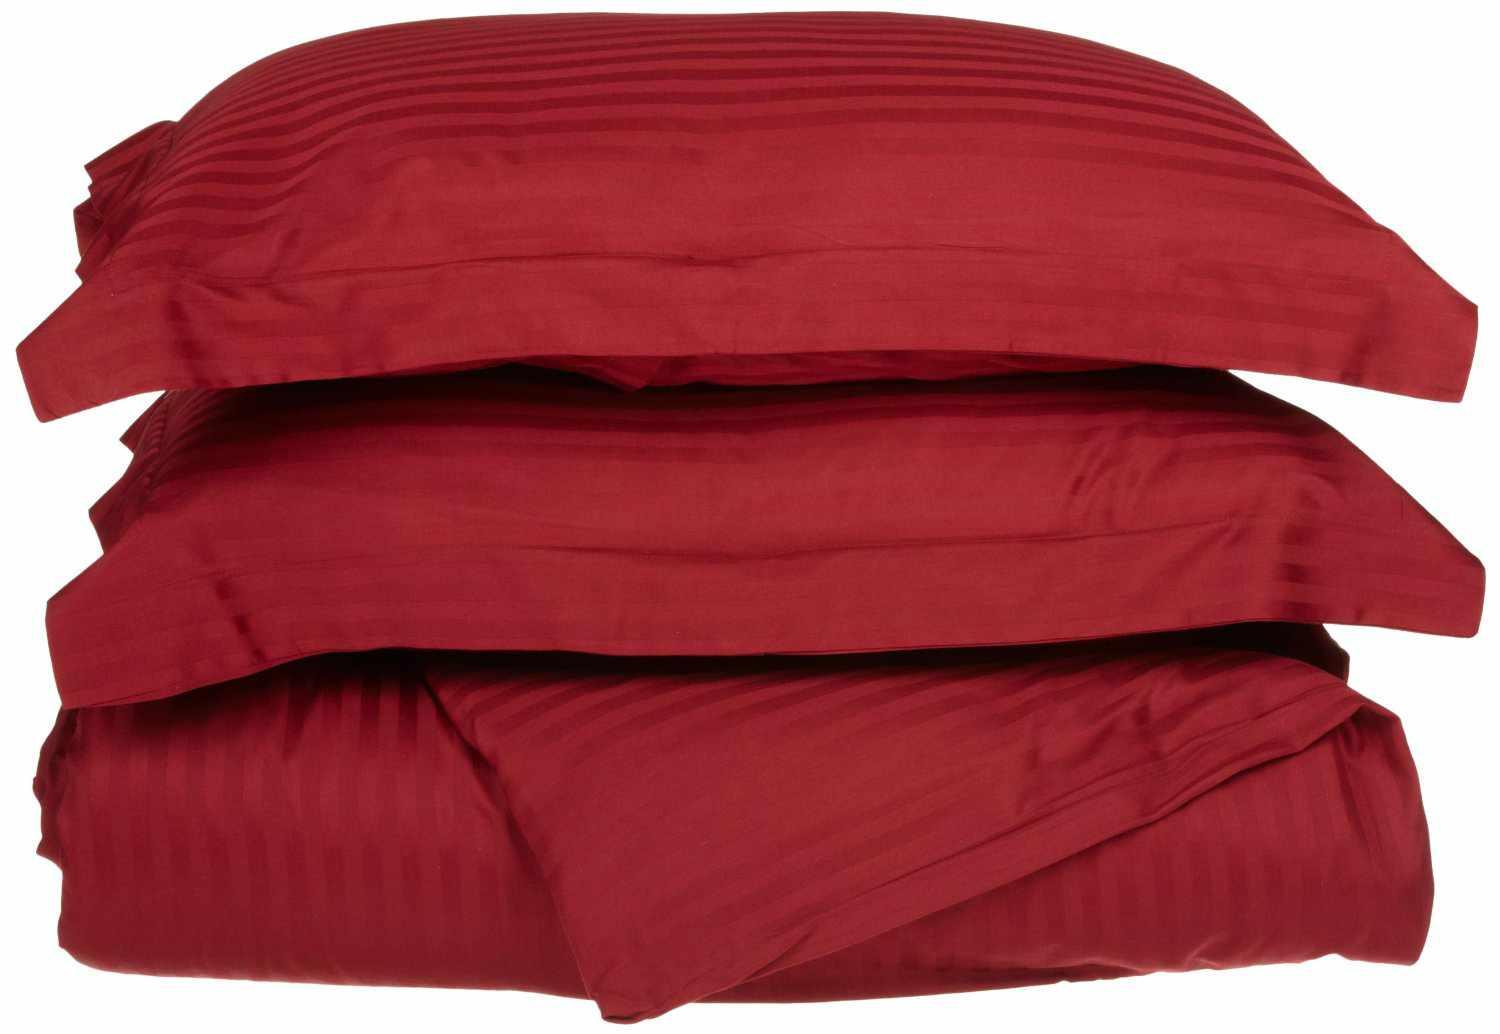  Superior Microfiber Wrinkle-Free Stripe Breathable Duvet Cover Set with Button Closure - Burgundy